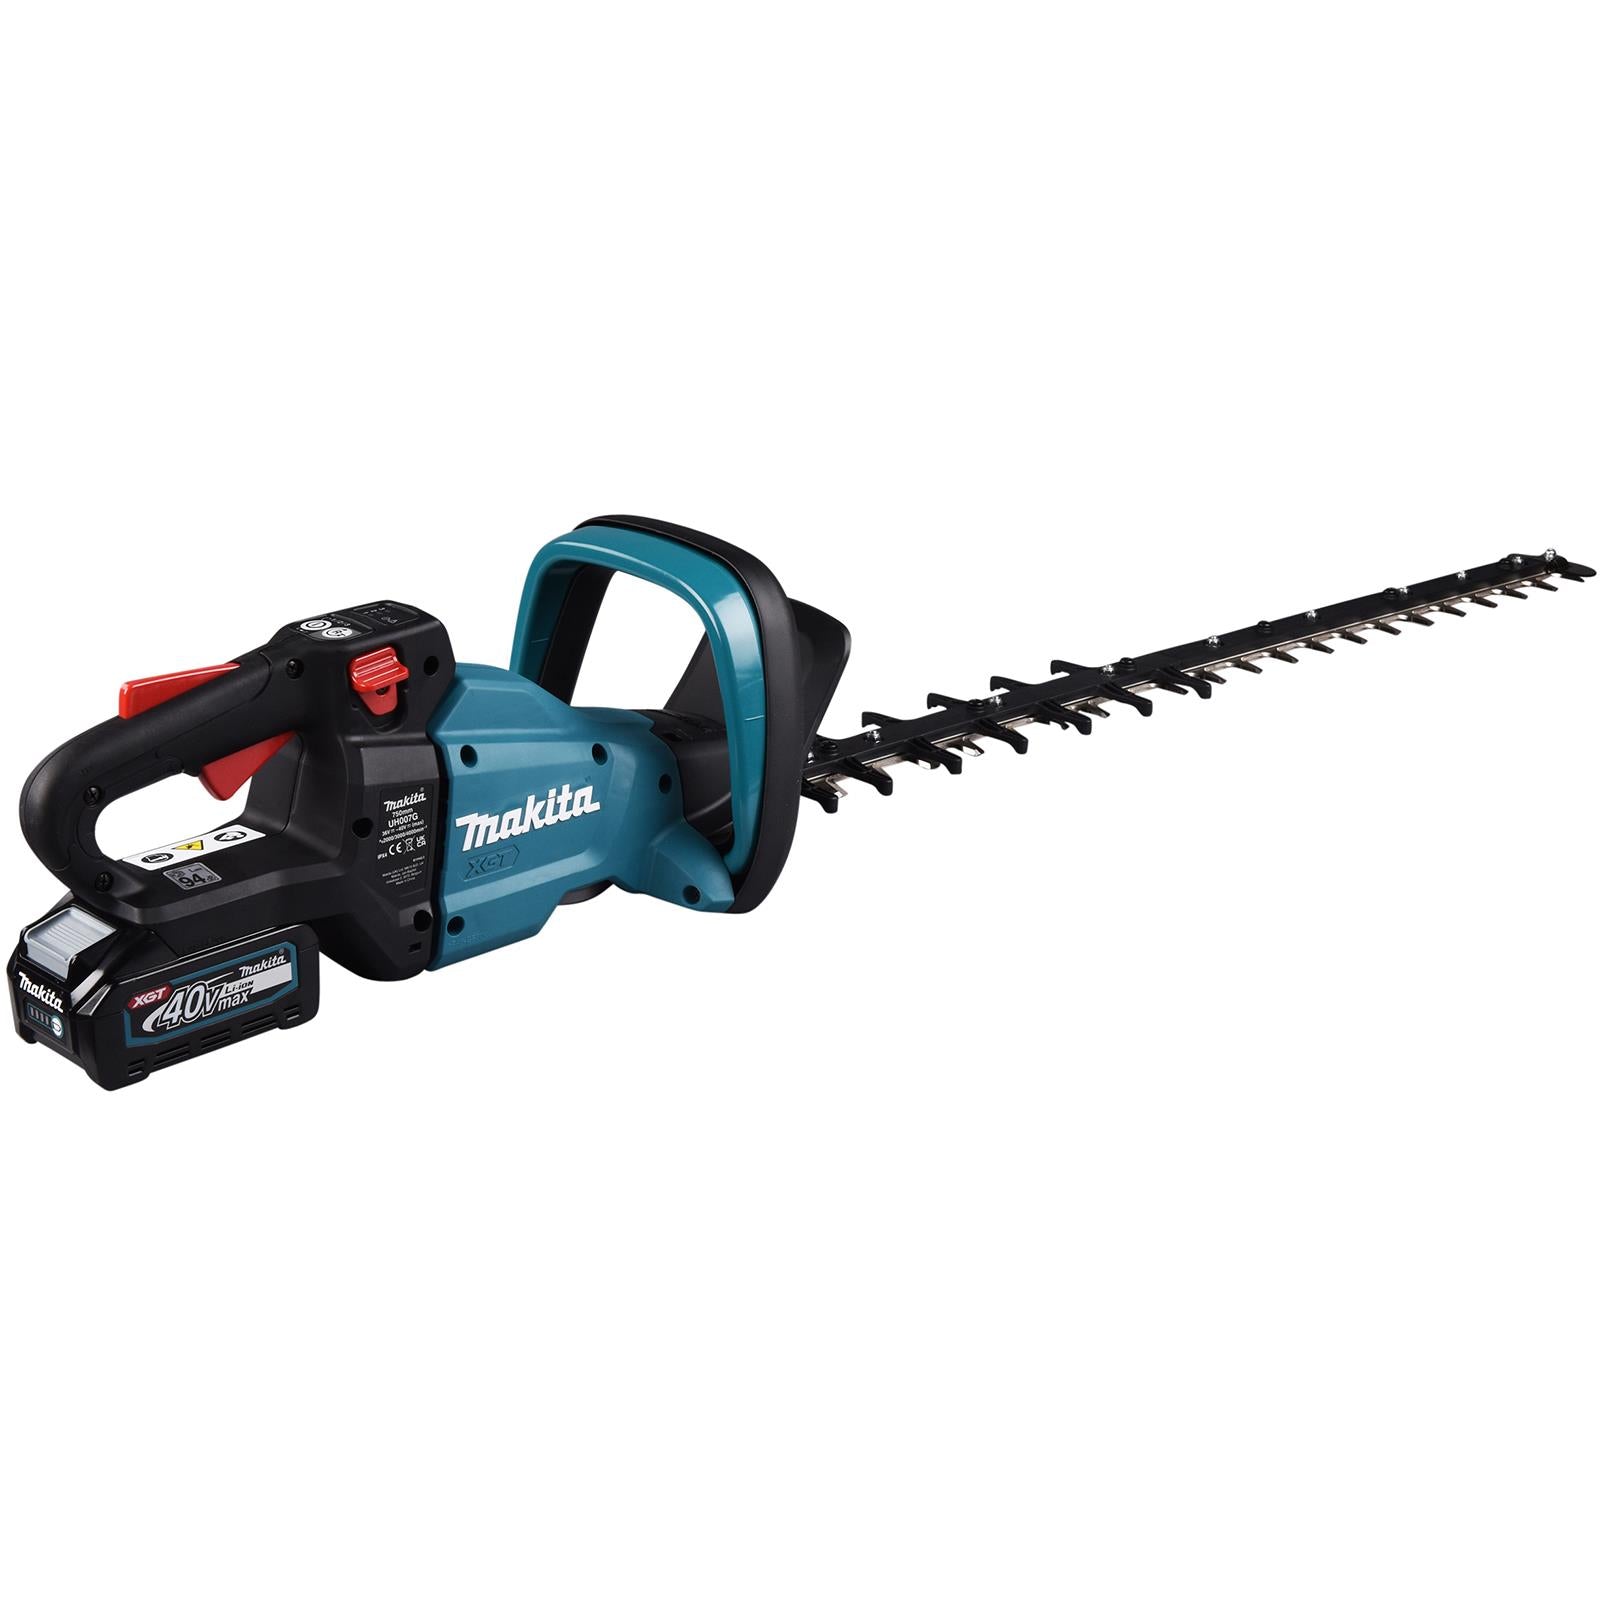 Makita Hedge Trimmer Kit 75cm 40V XGT Li-ion Brushless Cordless 2 x 2.5Ah Battery and Rapid Charger Garden Bush Cutter Cutting UH007GD201